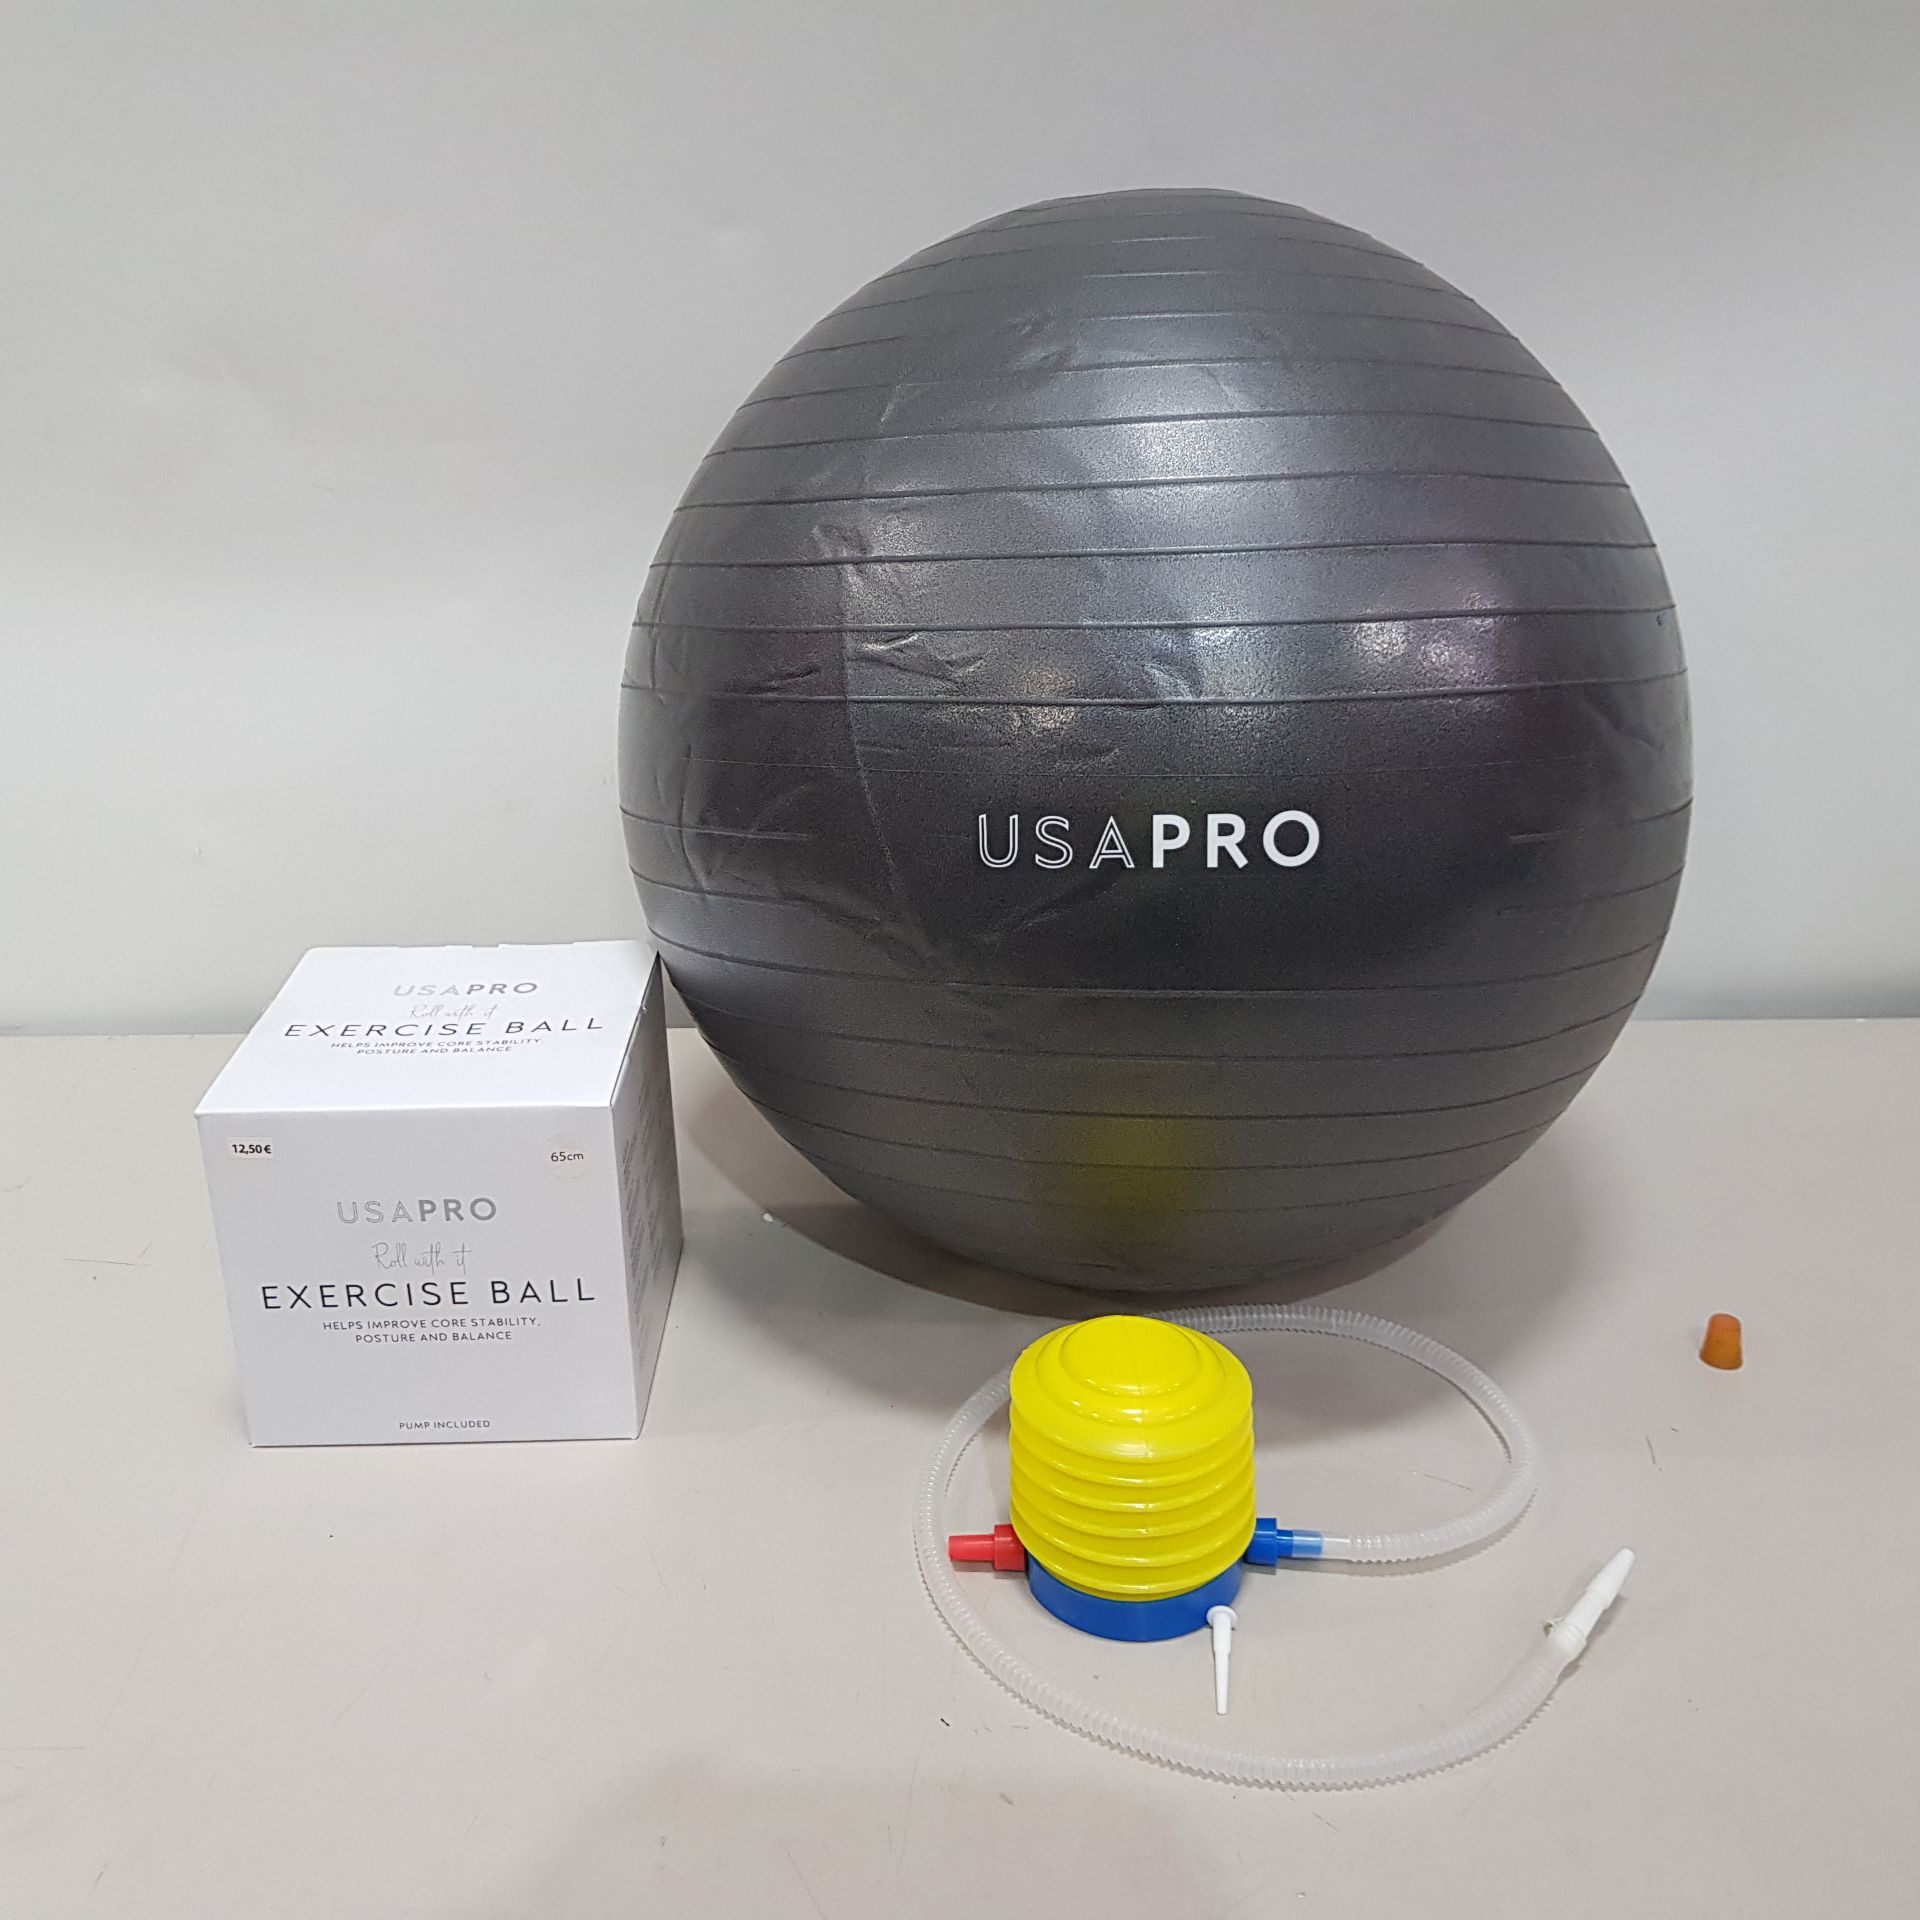 60 X BRAND NEW USA PRO EXERCISE BALL - INCLUDES PUMP - ALL IN SIZE 65 CM - RRP £ 17.99 EACH - IN 5